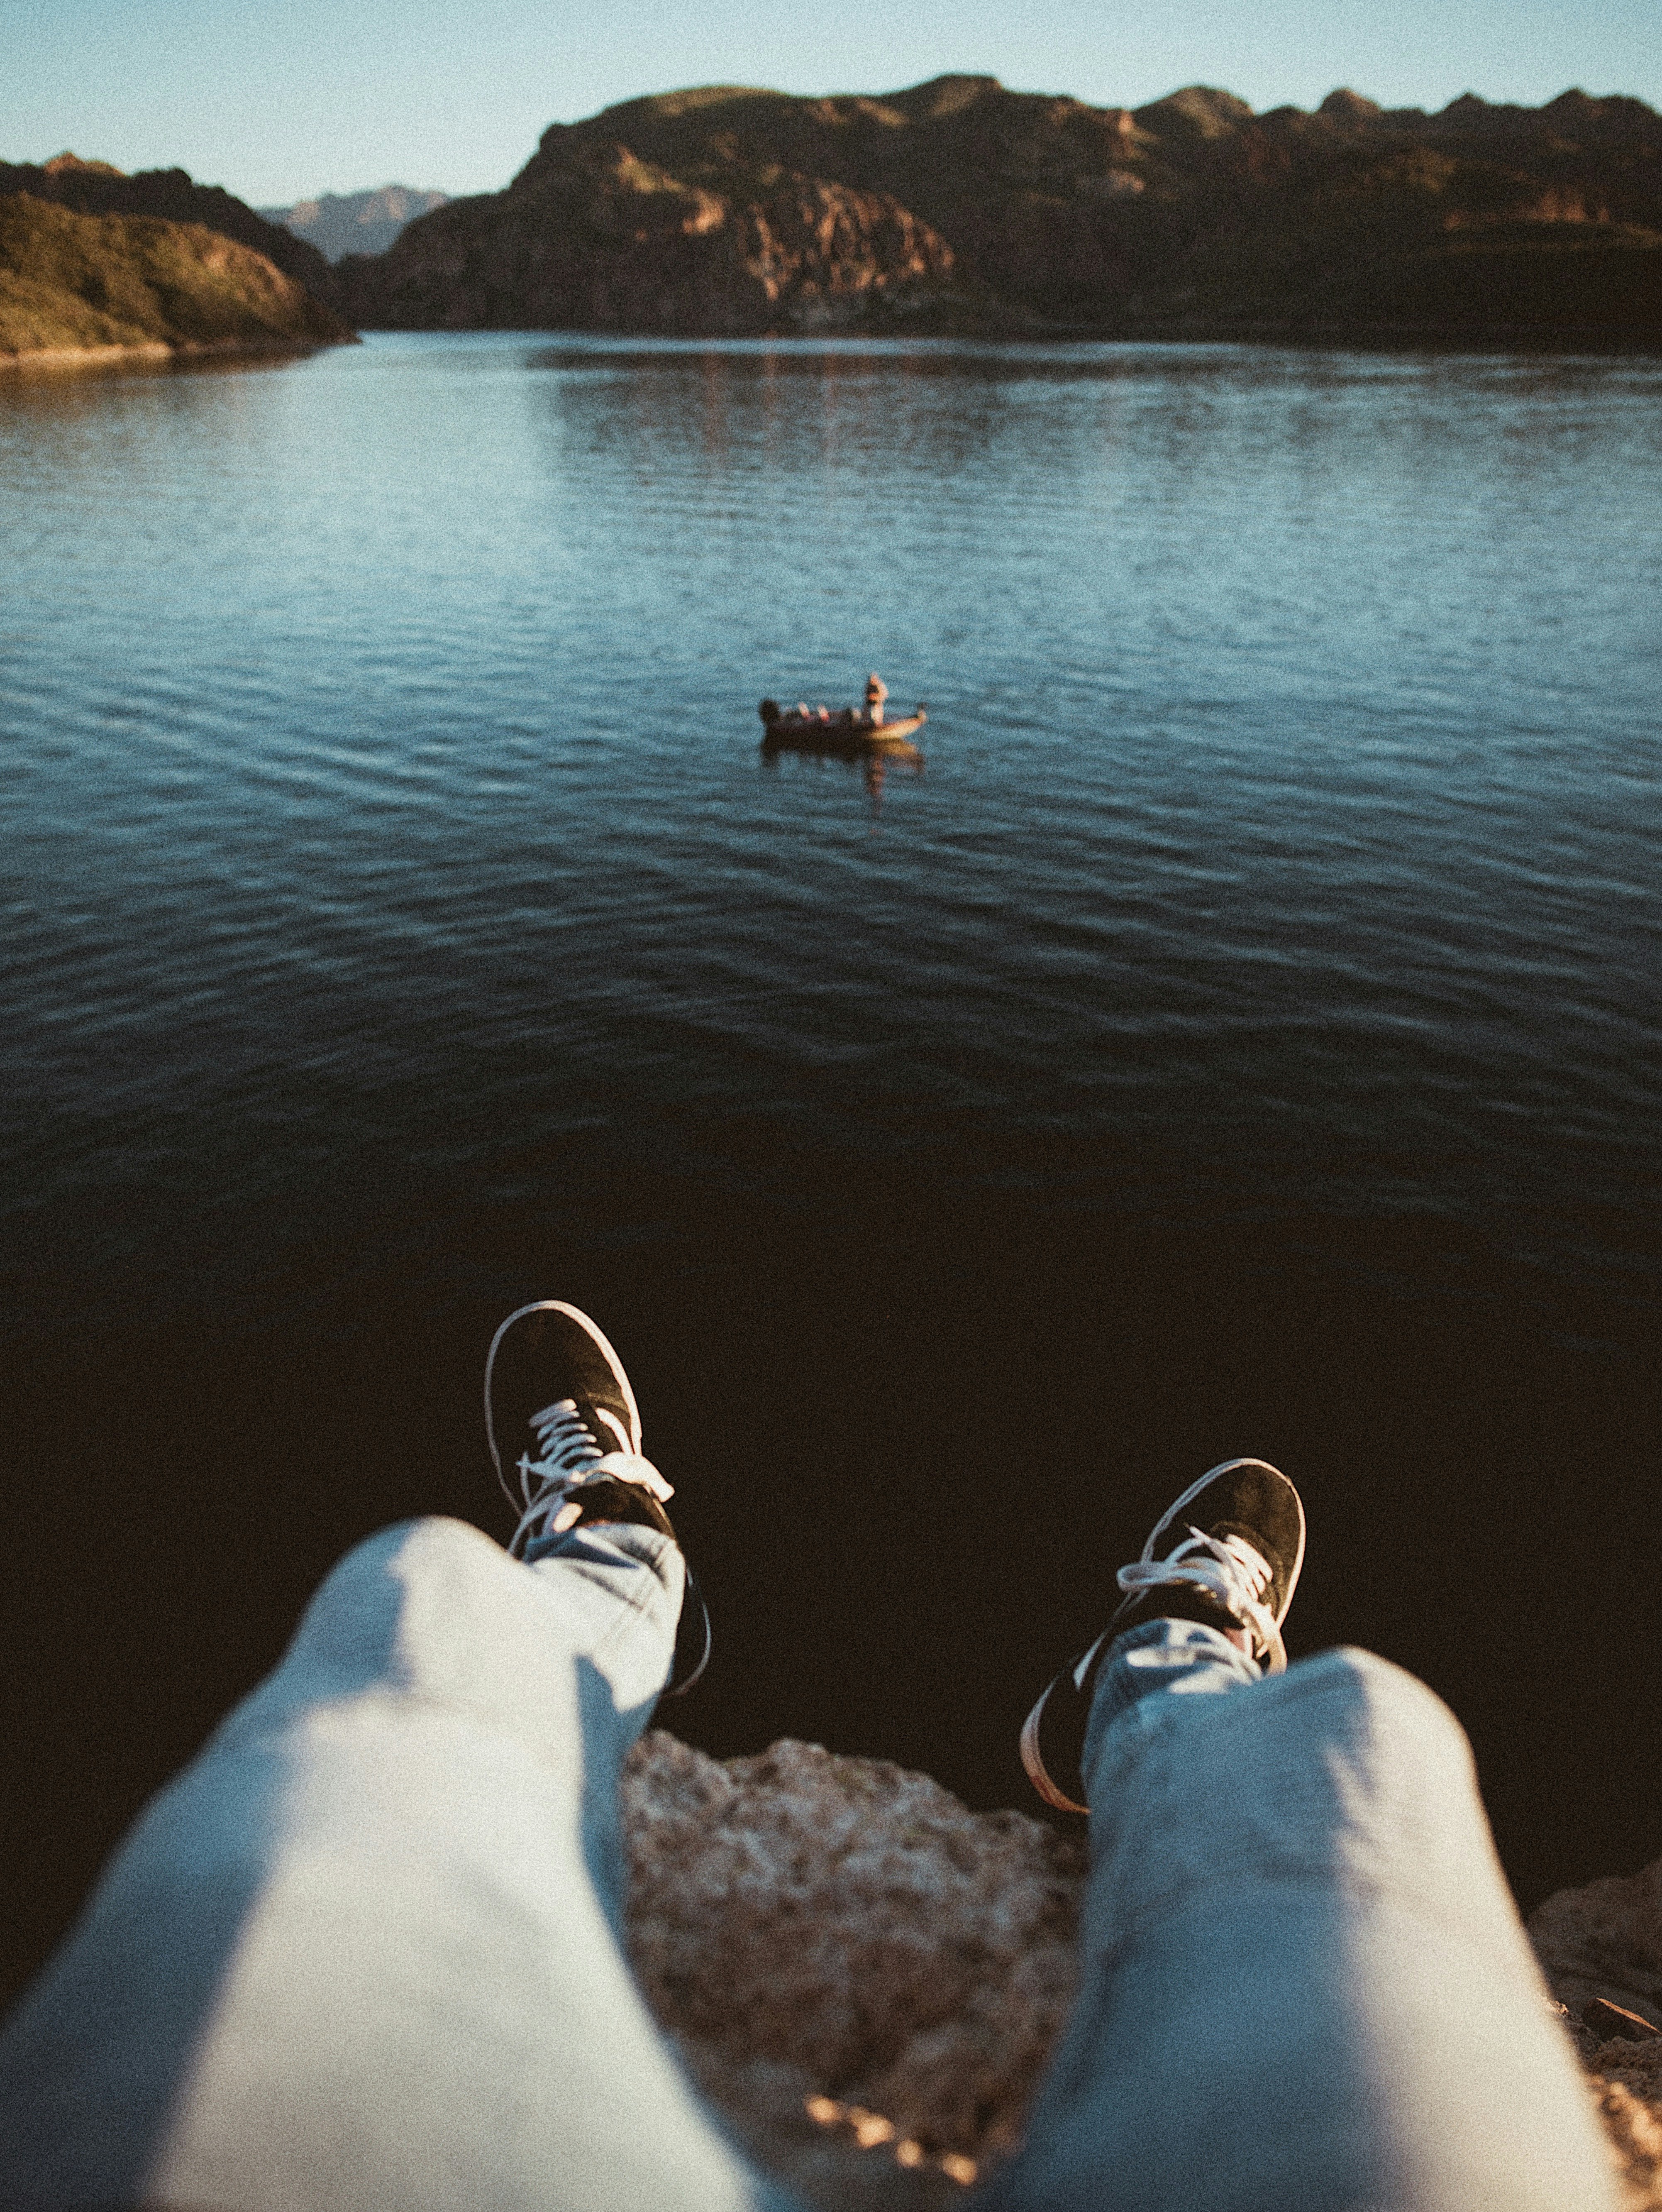 person sitting on rock near body of water